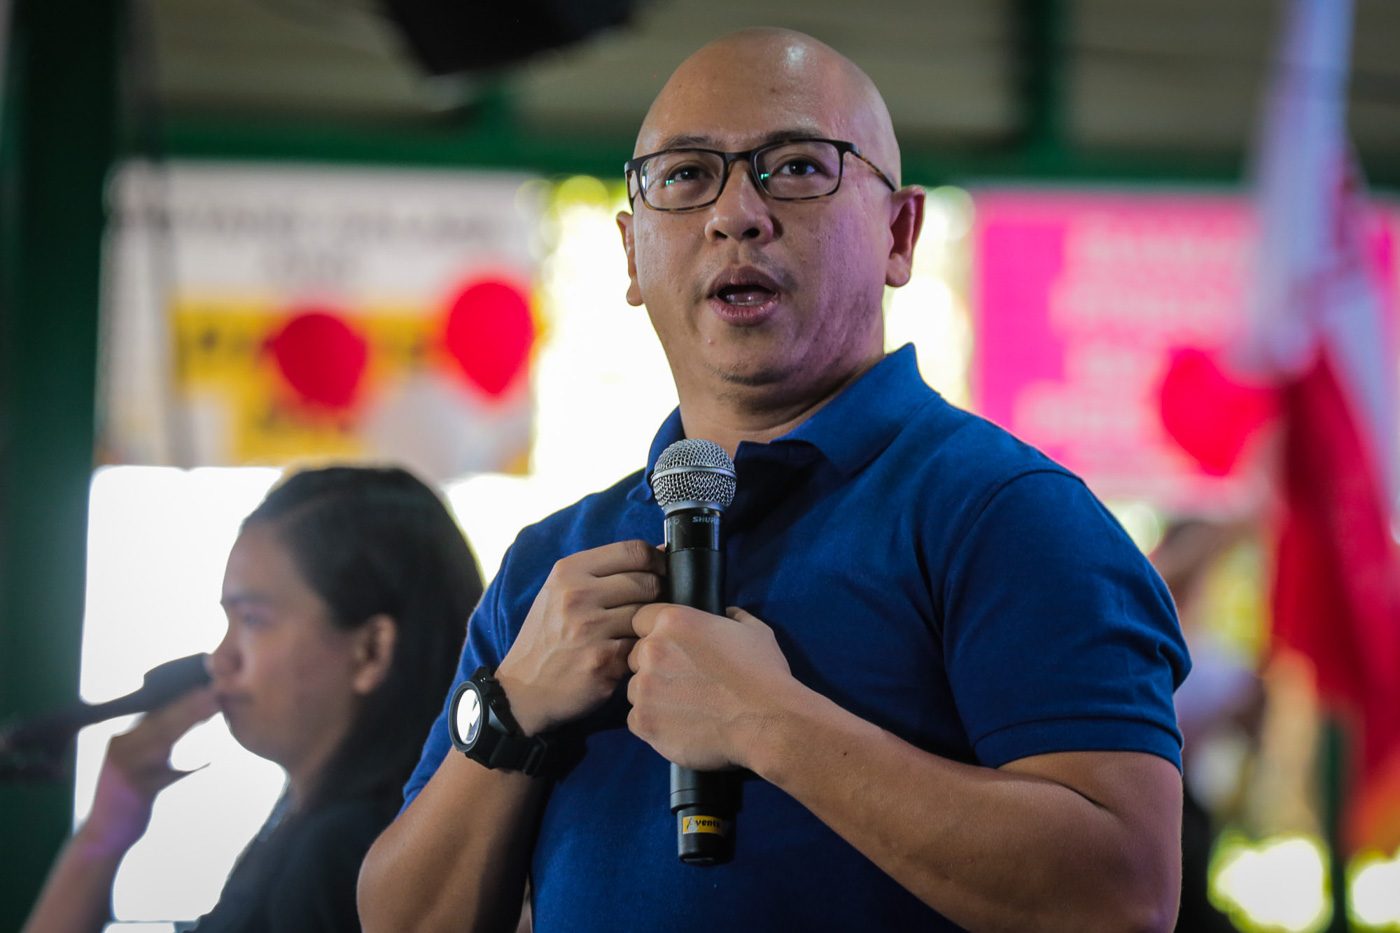 Hilbay: Same-sex marriage should be fought in Congress, not Supreme Court